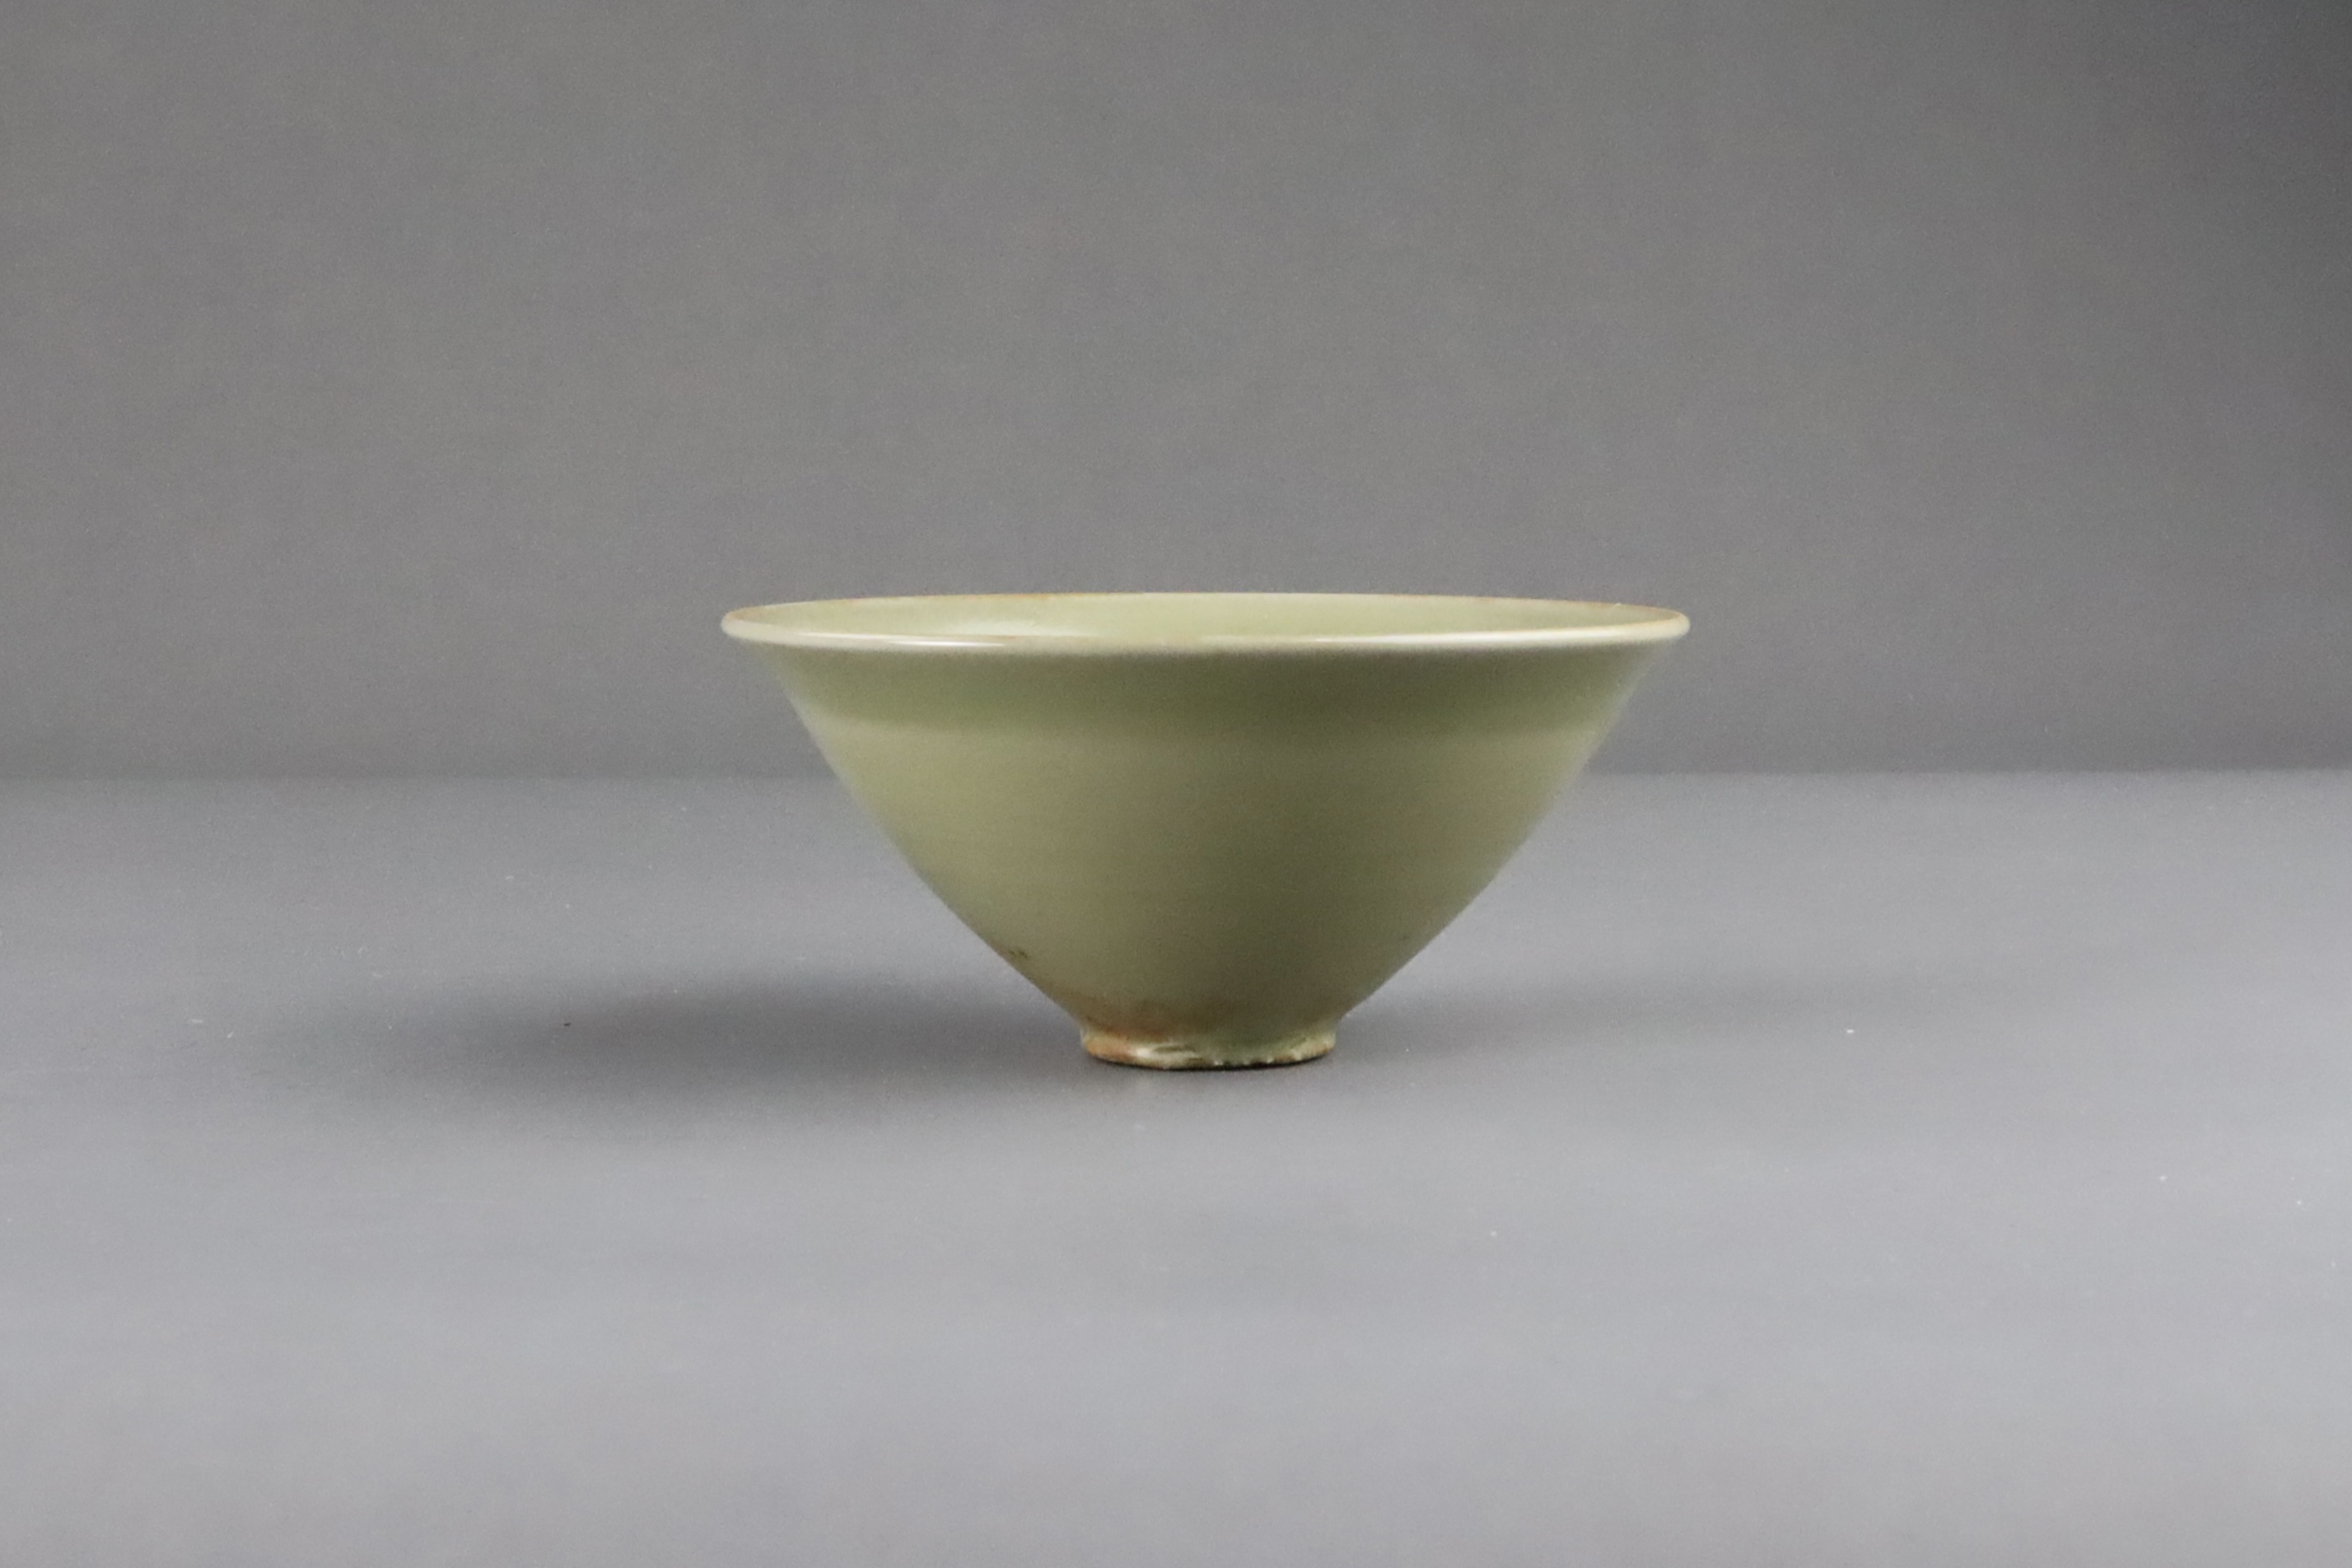 A Fine Yaozhou Celadon Conical Bowl, Song dynasty - Image 11 of 11